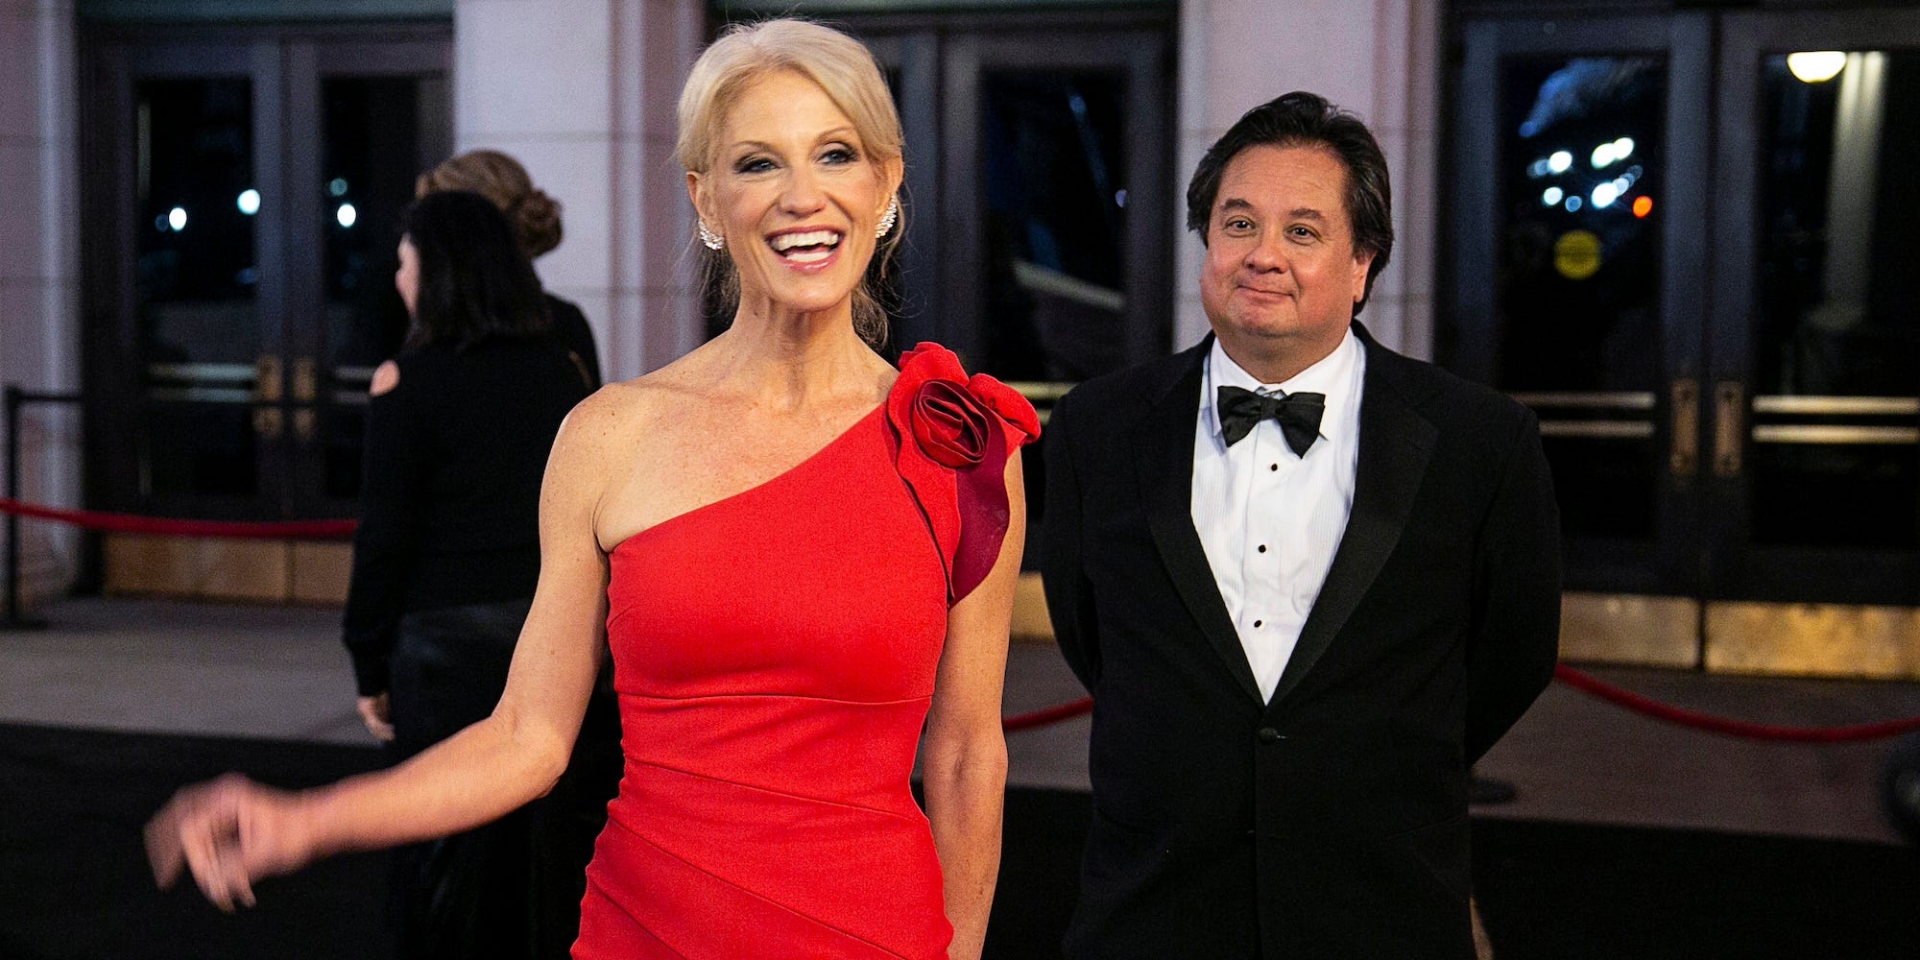 Who is Kellyanne Conway - Biography, Family & Daughter, Political Career and more Personal Profiles